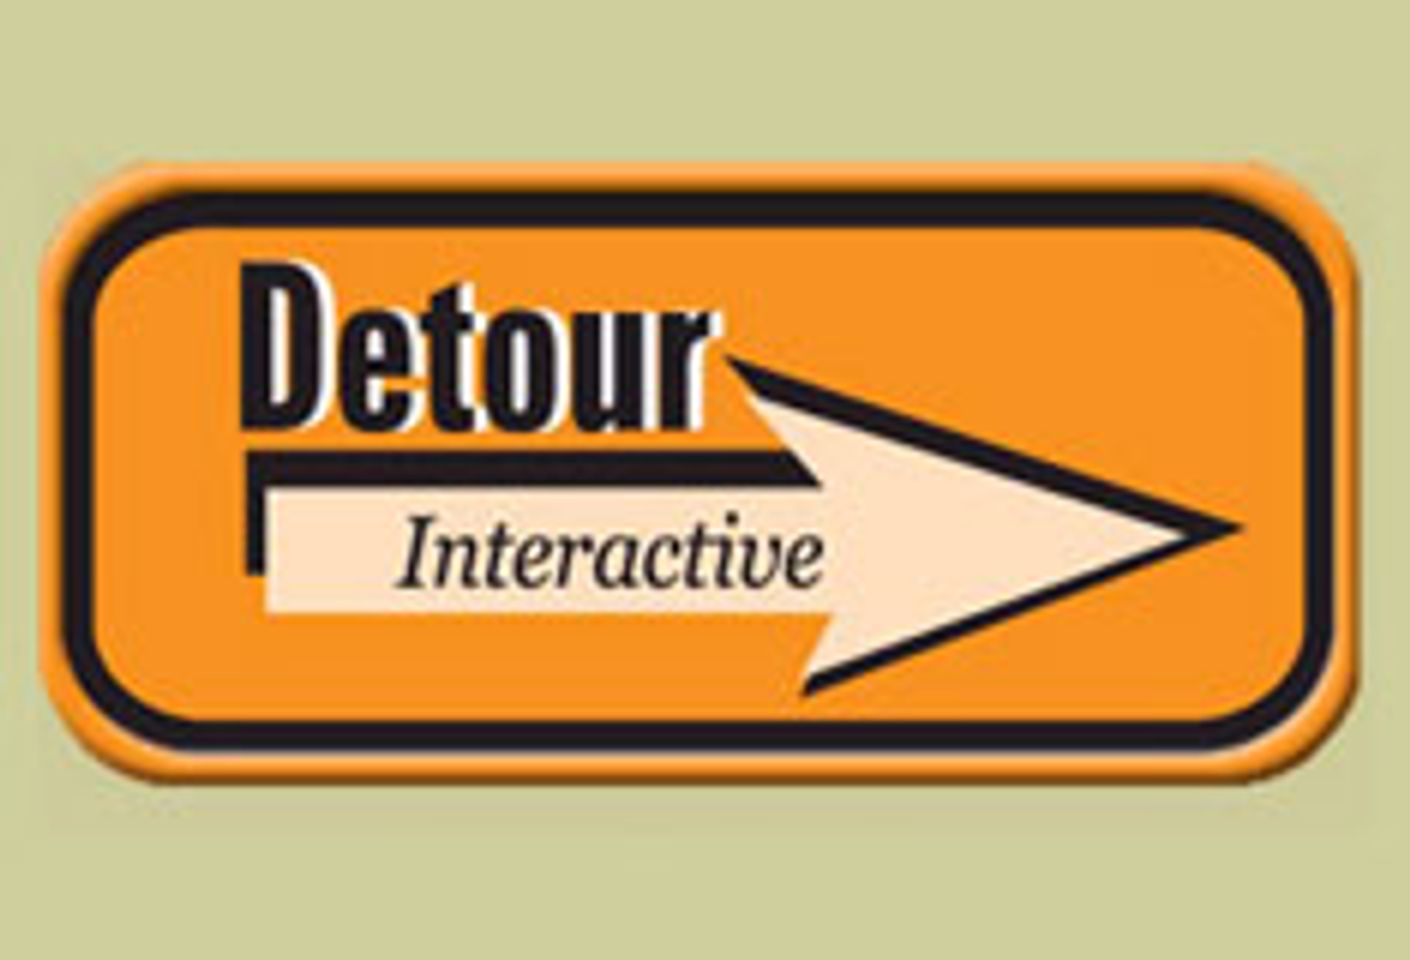 "Get Noticed At Internext": Detour Interactive Special